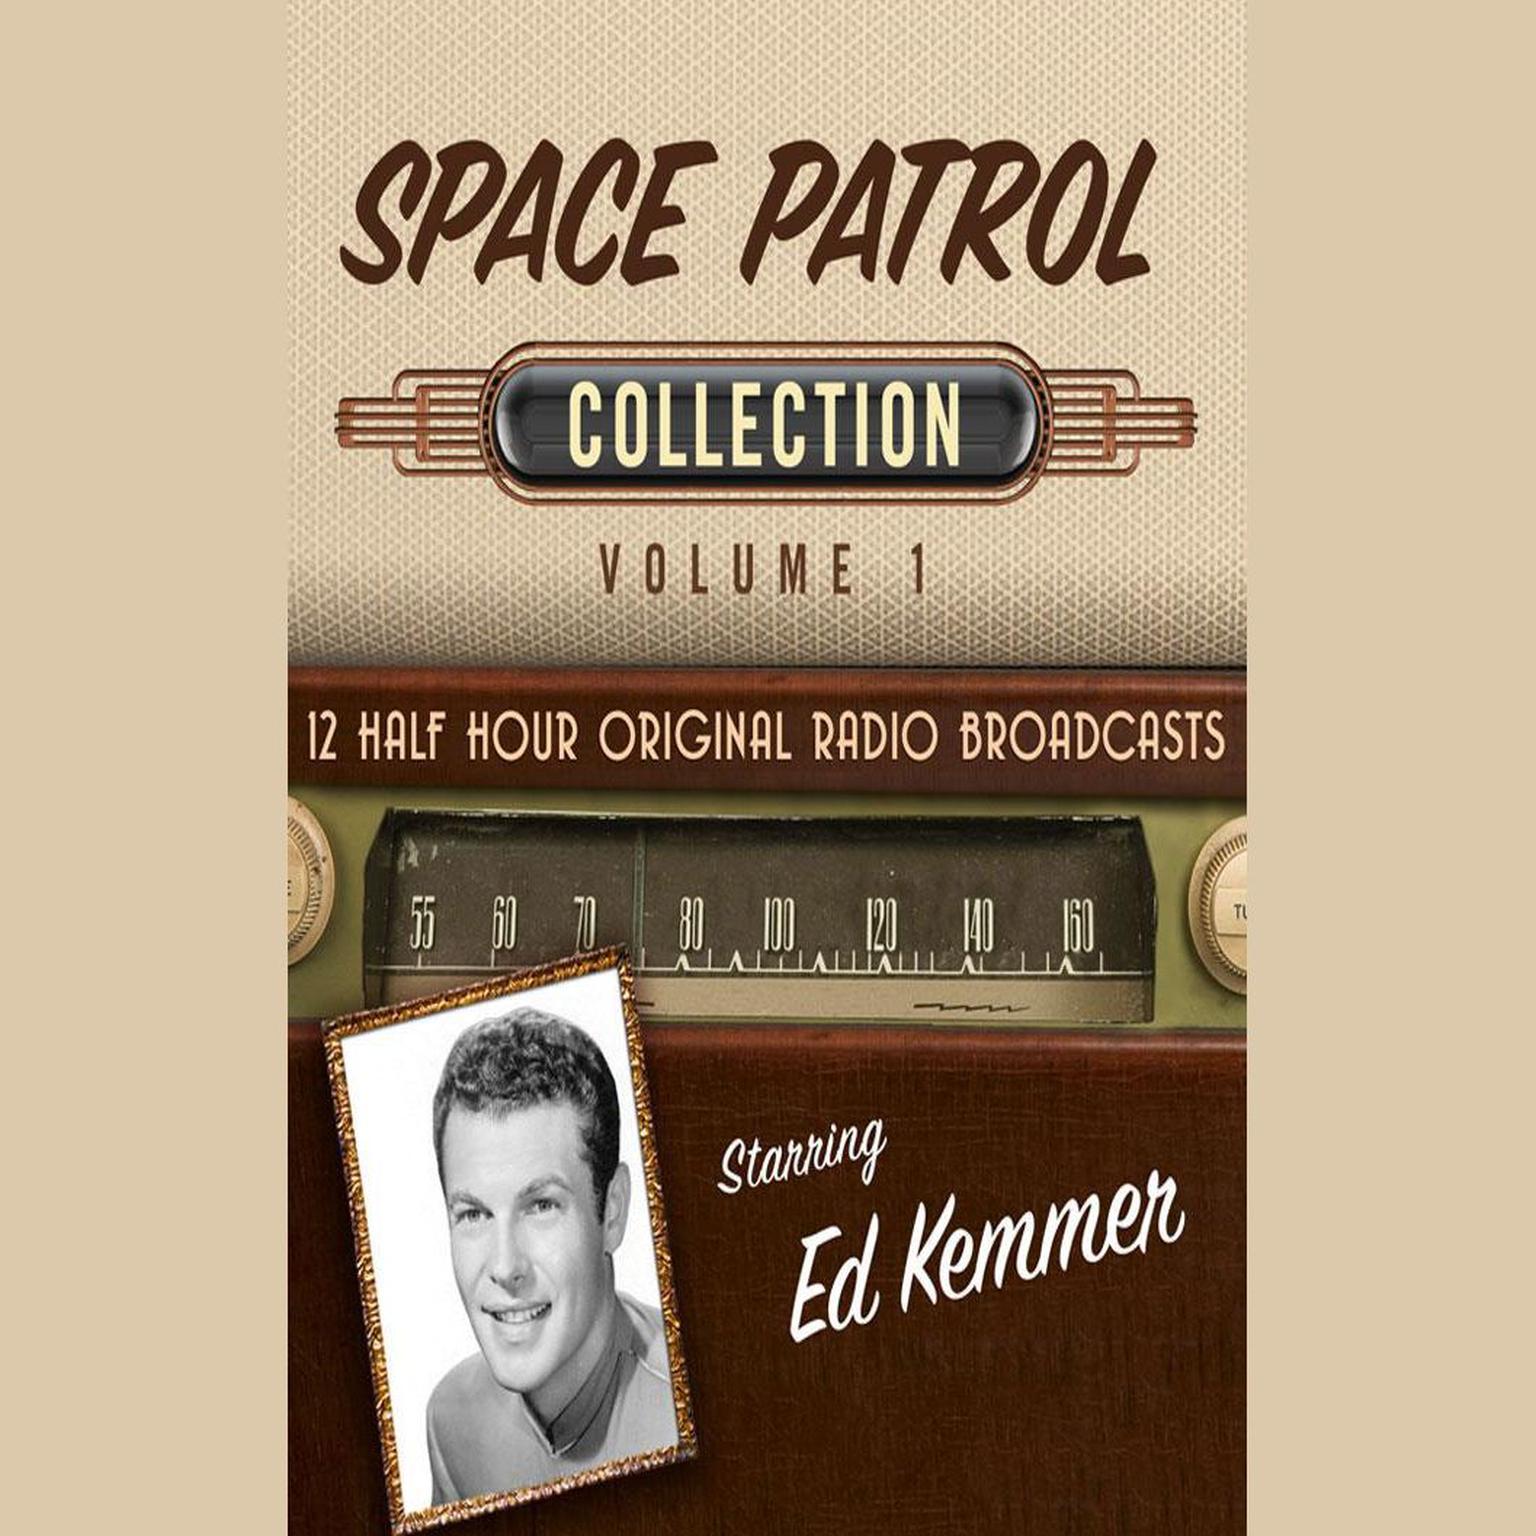 Space Patrol, Collection 1 Audiobook, by Black Eye Entertainment